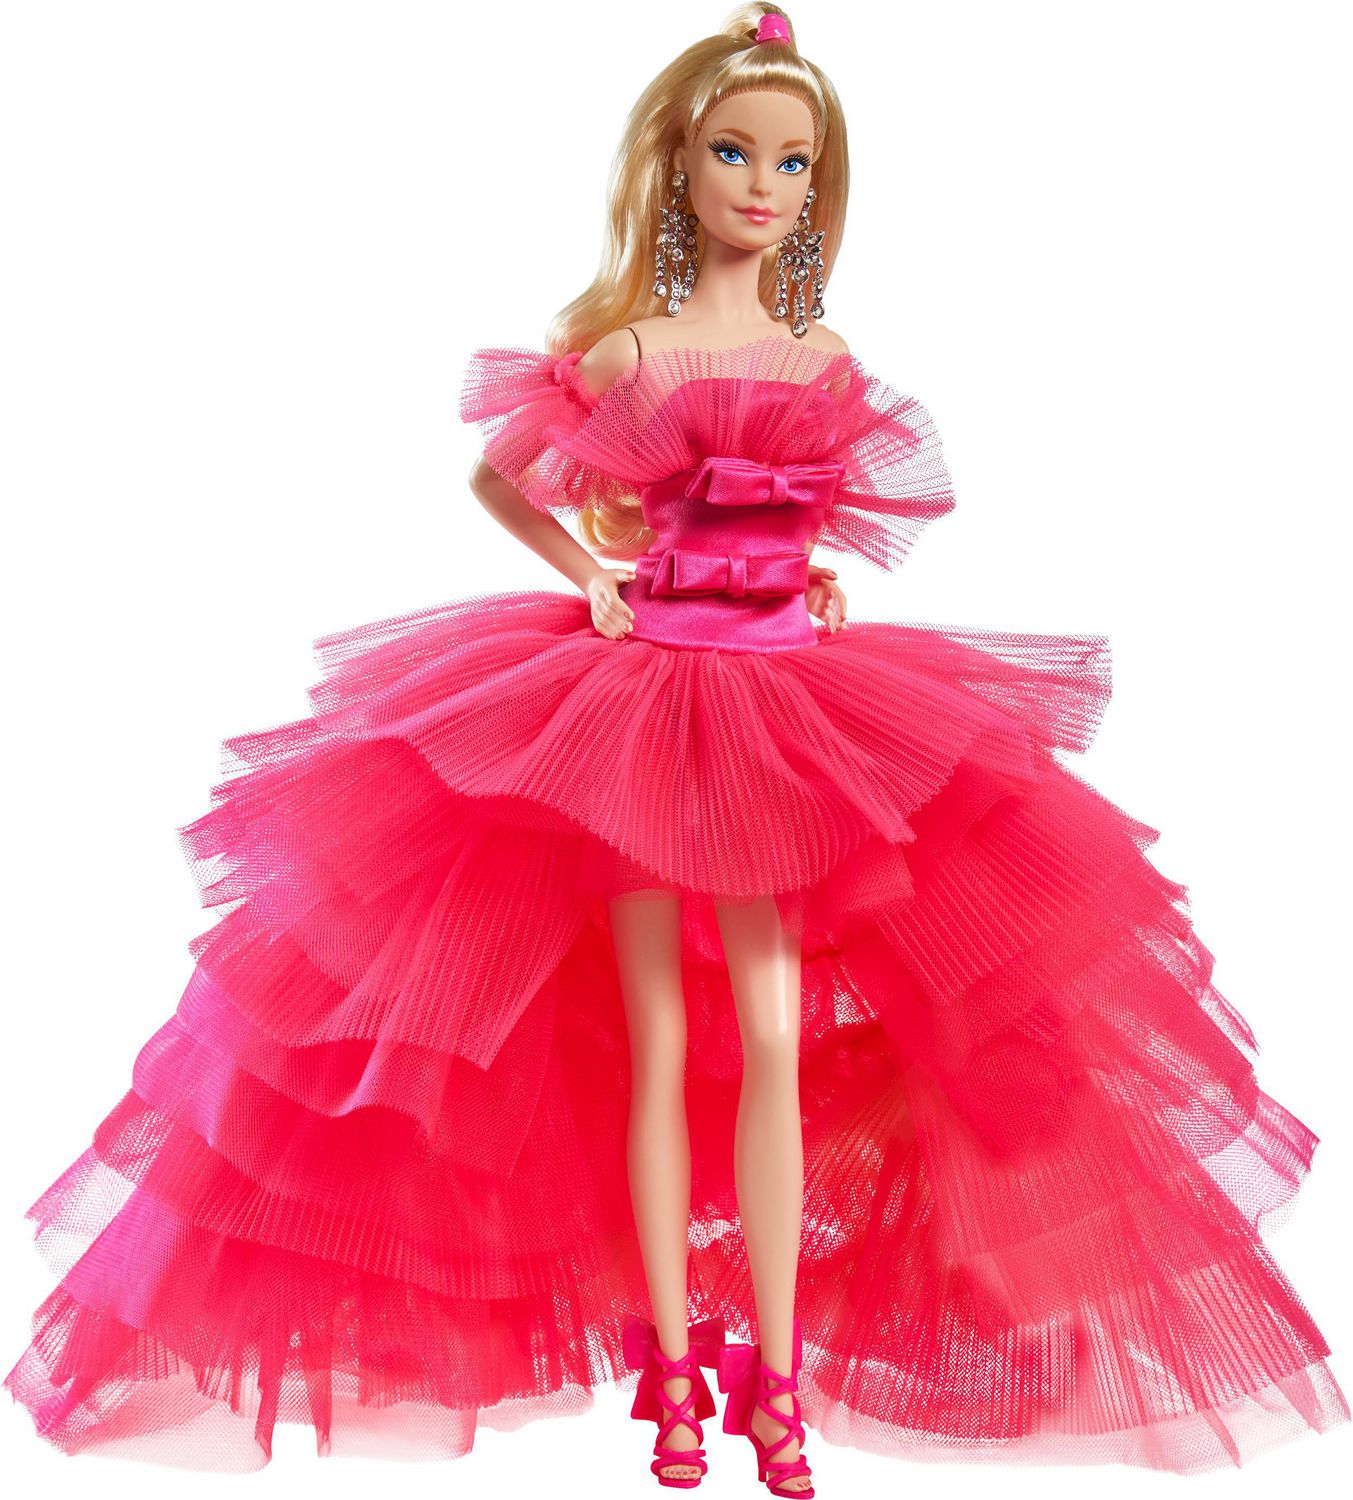 Barbie Signature Pink Collection Doll With Silkstone Body Wearing Tulle